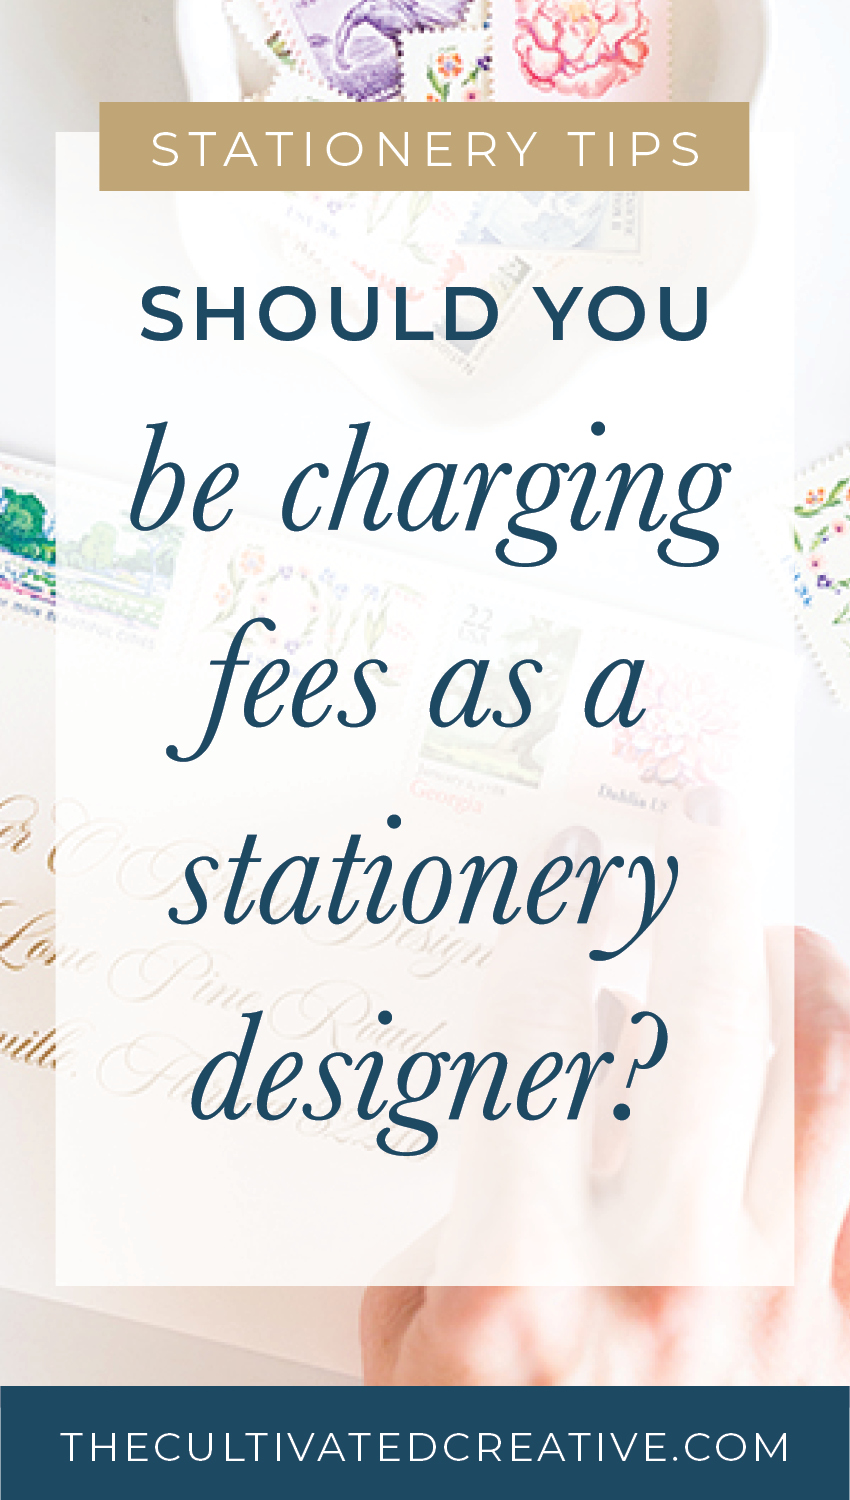 charging fees as a stationer